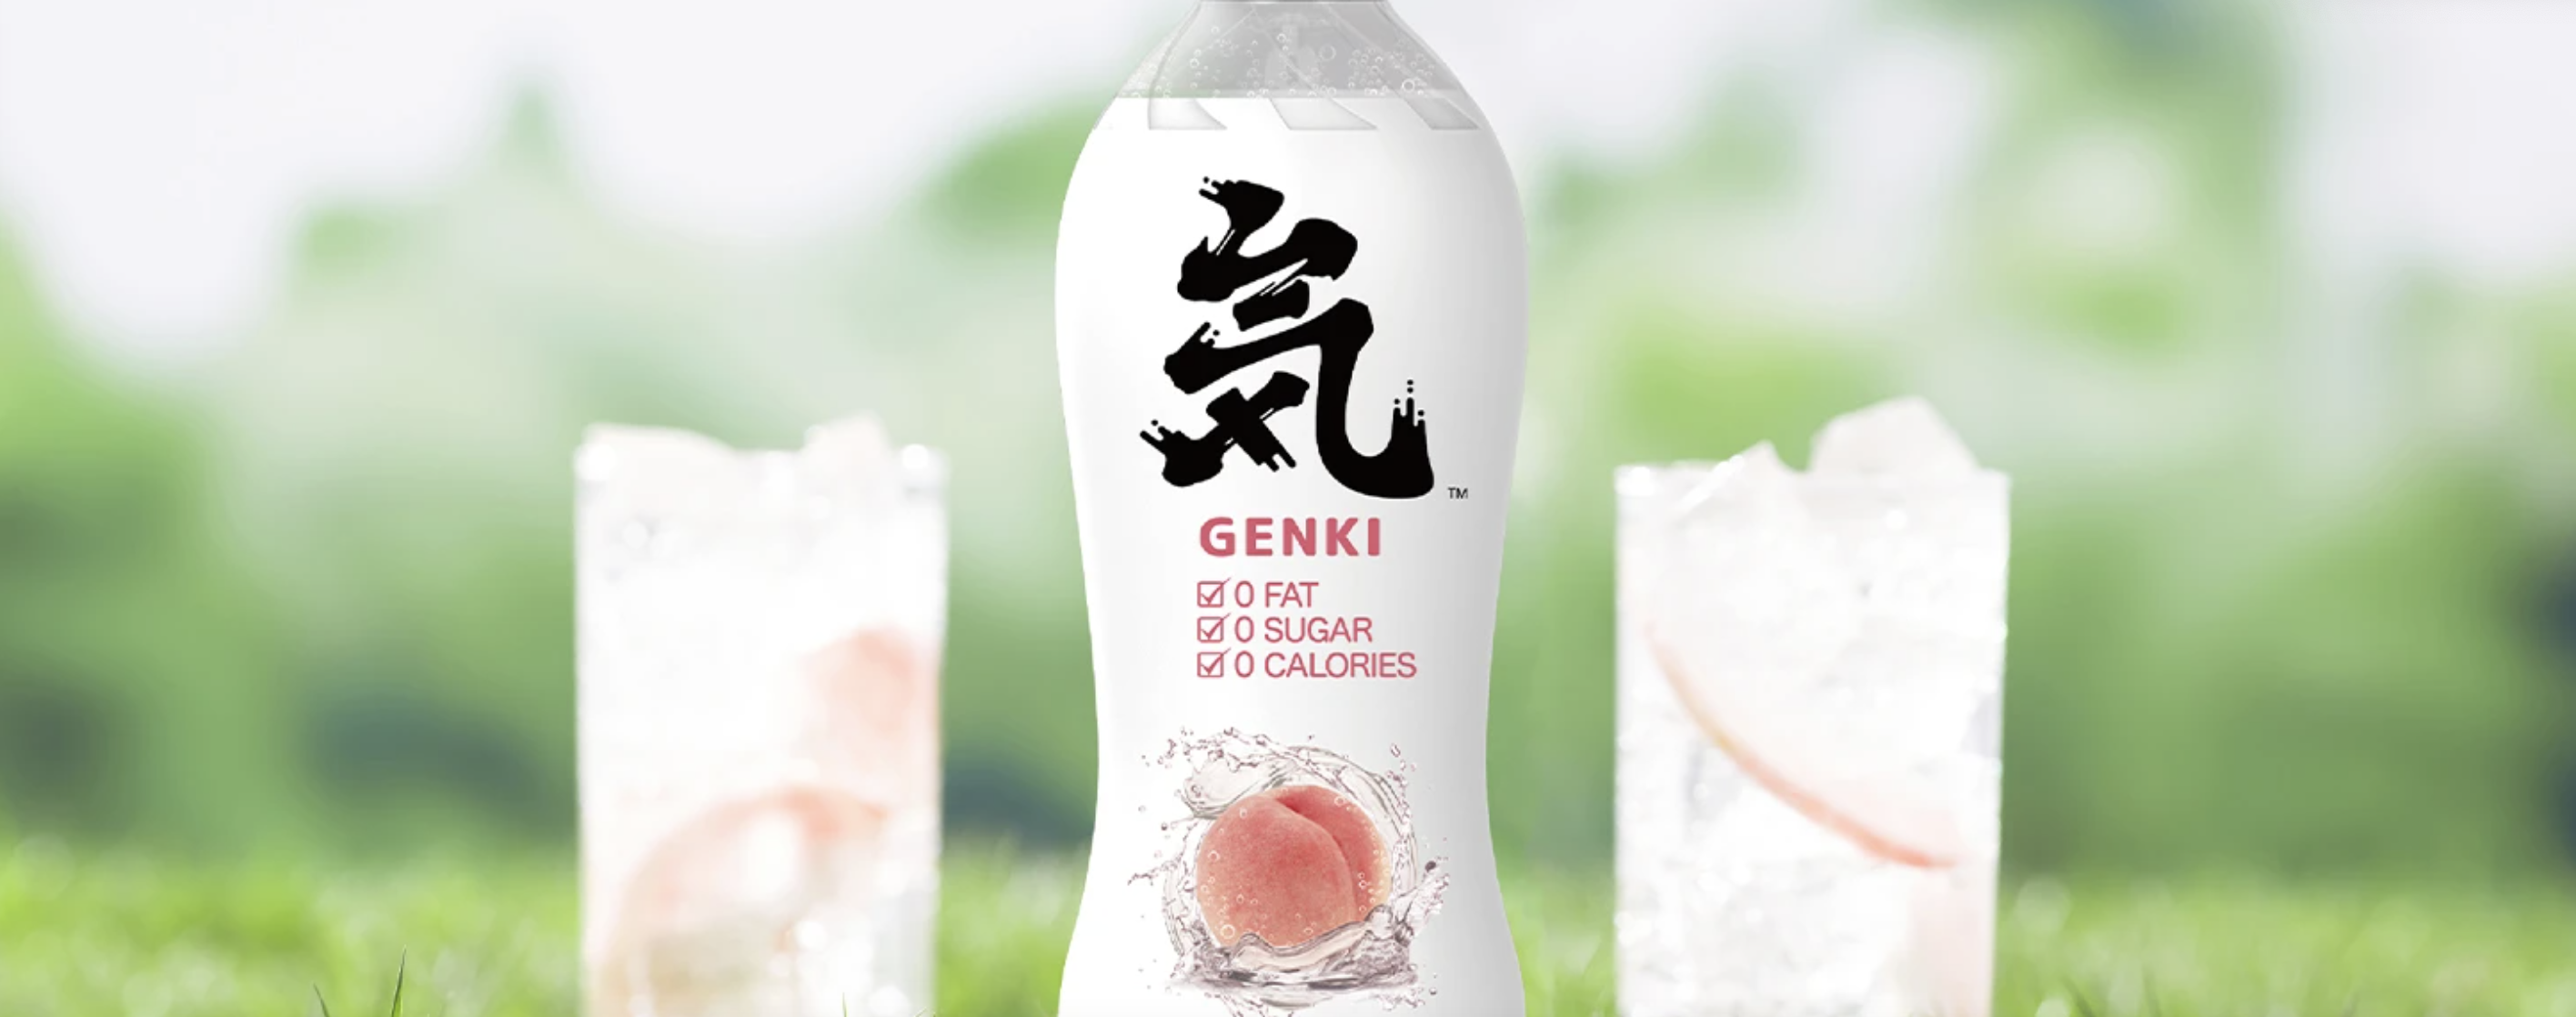 Beverage unicorn Genki Forest wants to be treated like a tech startup, but does the label stick?